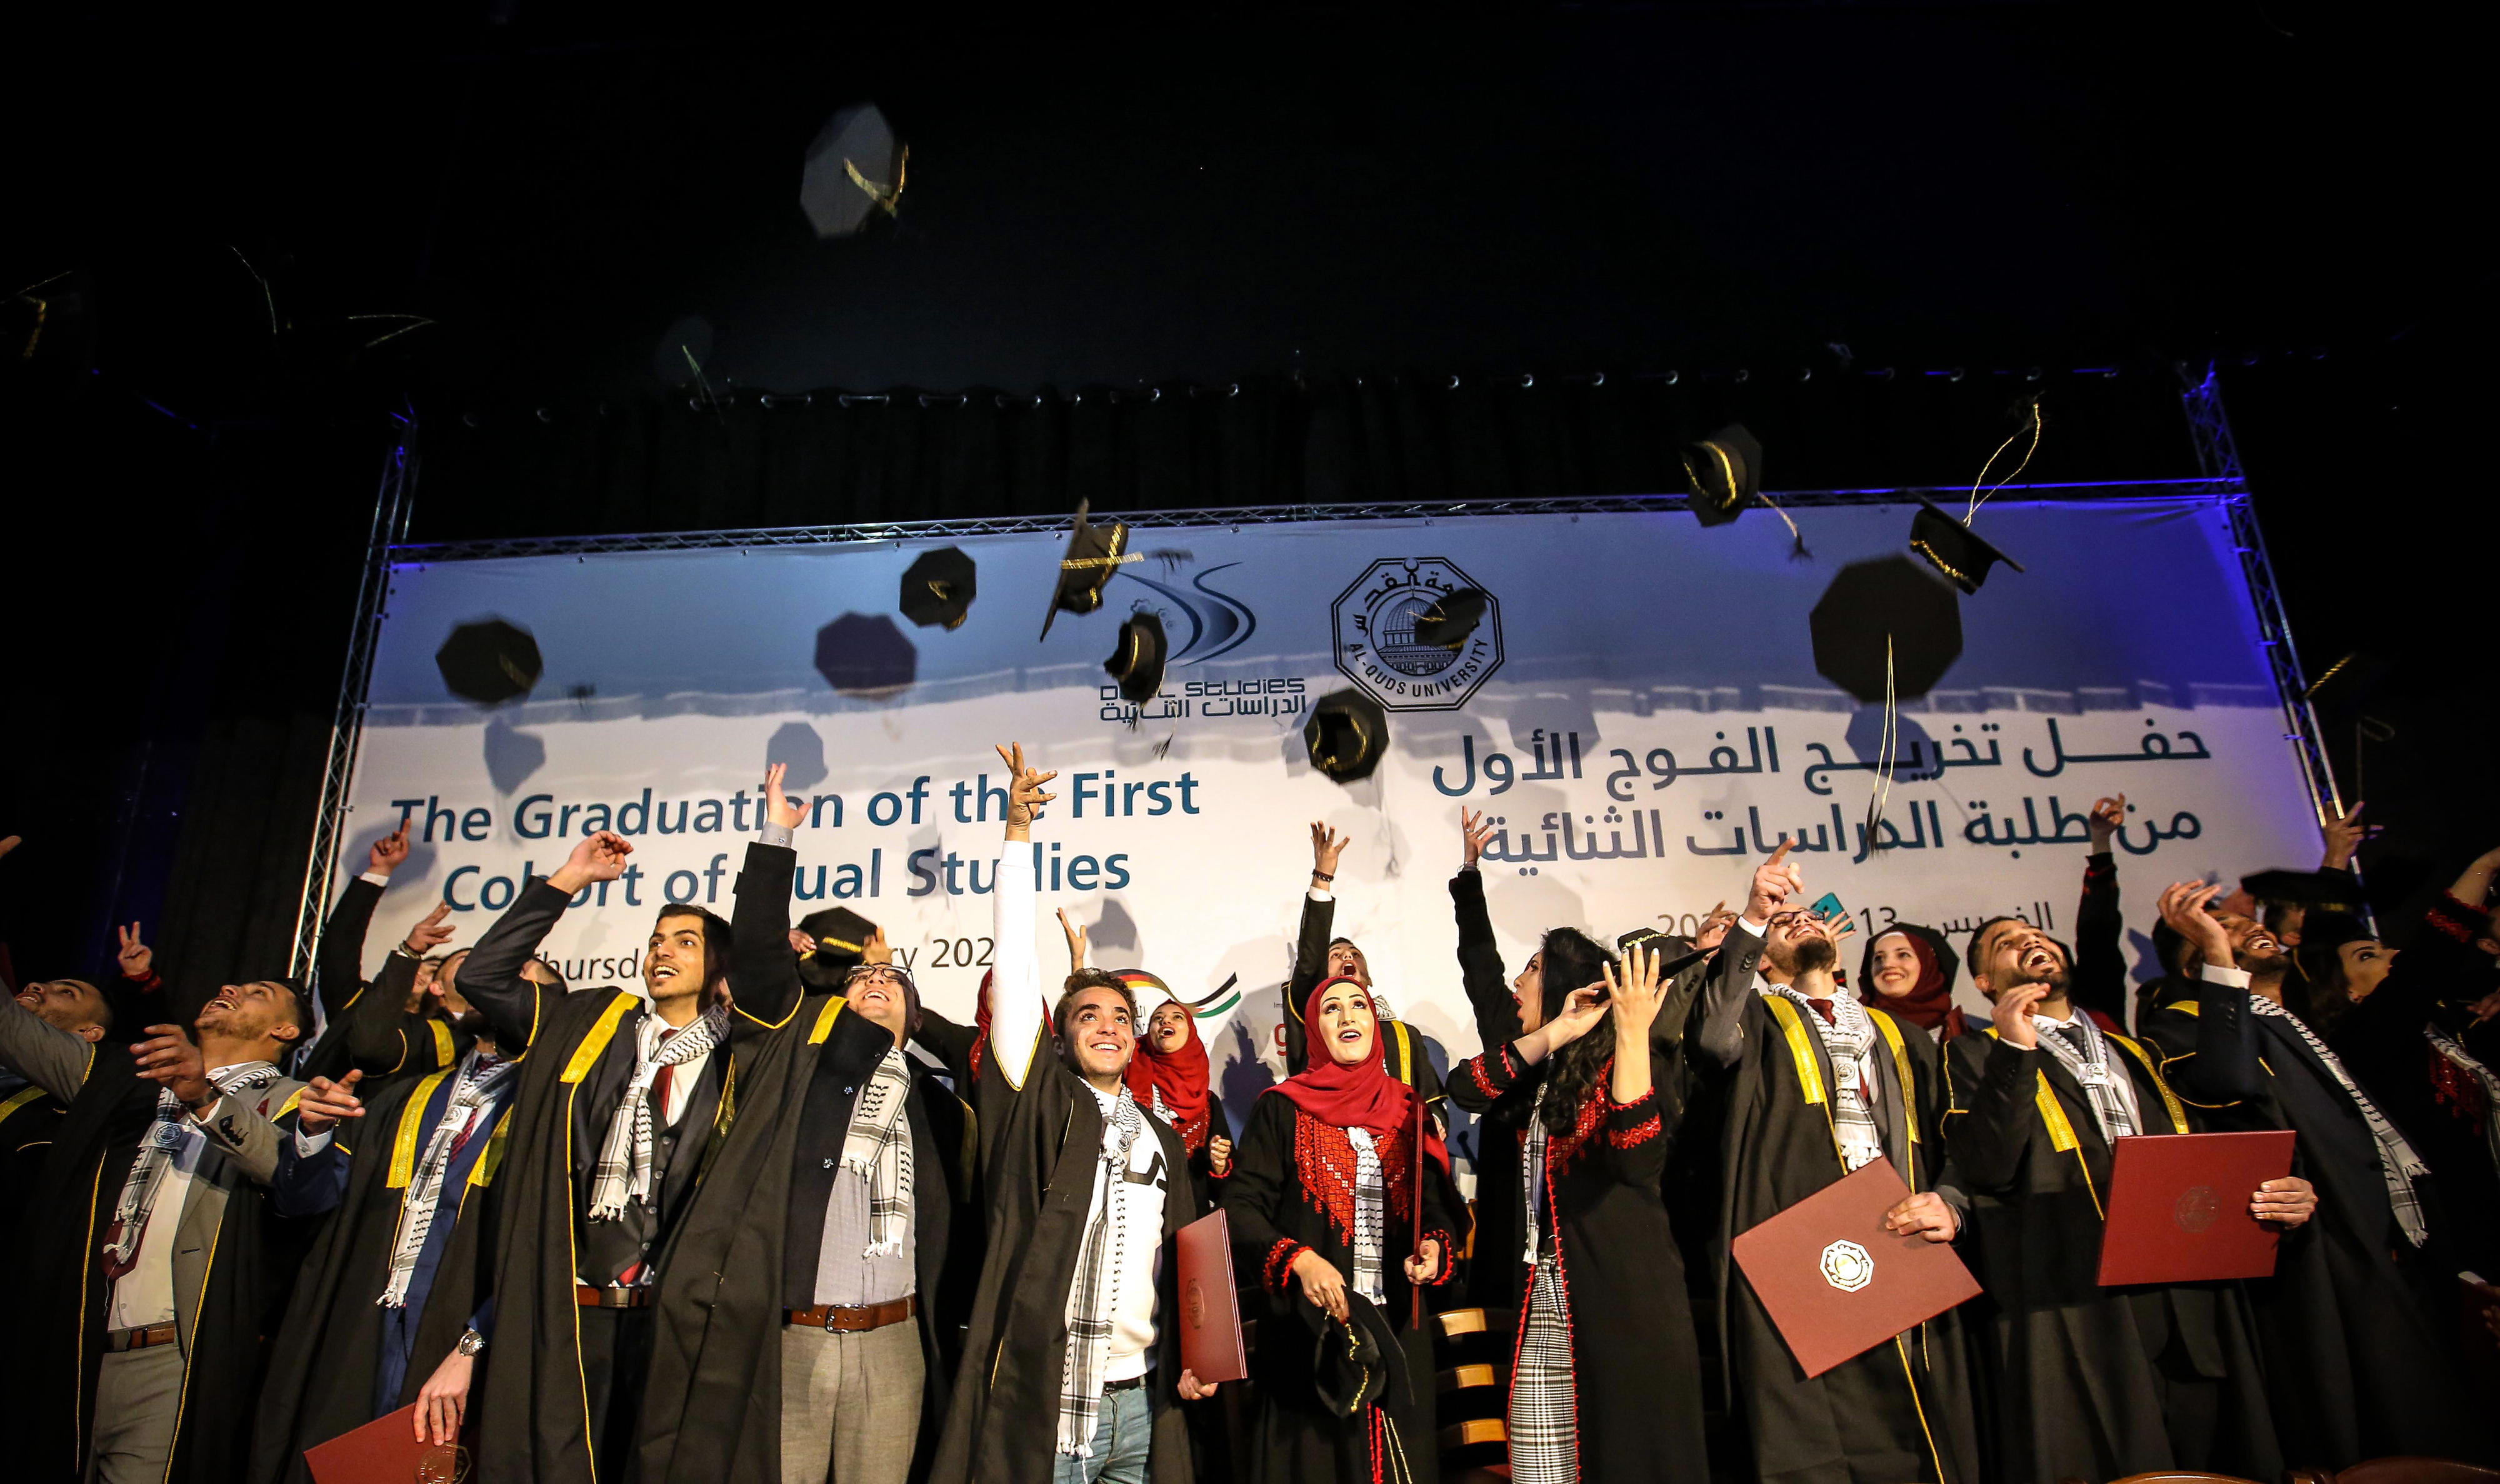 Dual study programmes at Al-Quds University in East Jerusalem: Diploma award ceremony and celebration for the first graduates who completed their studies in electrical engineering and information technology in February 2020